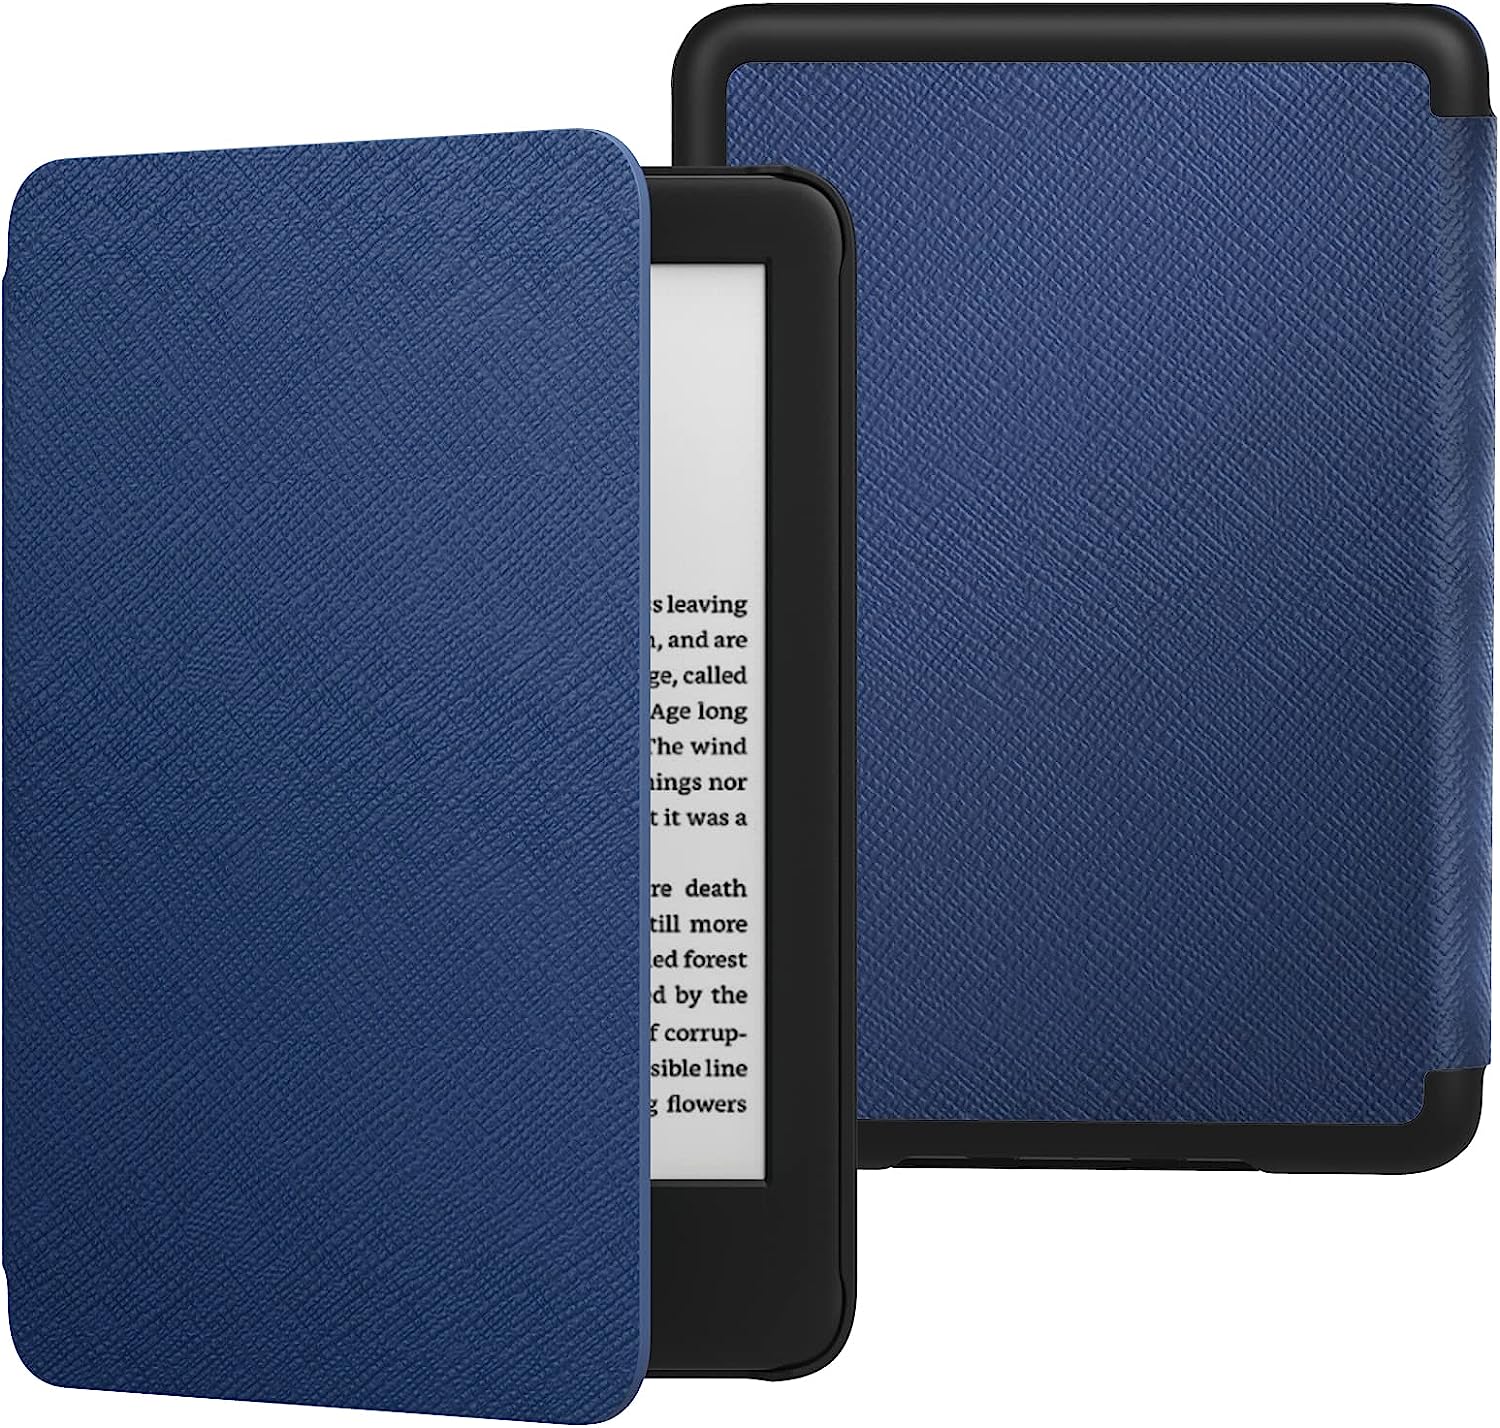 all-new-kindle-2022-case-deep-blue